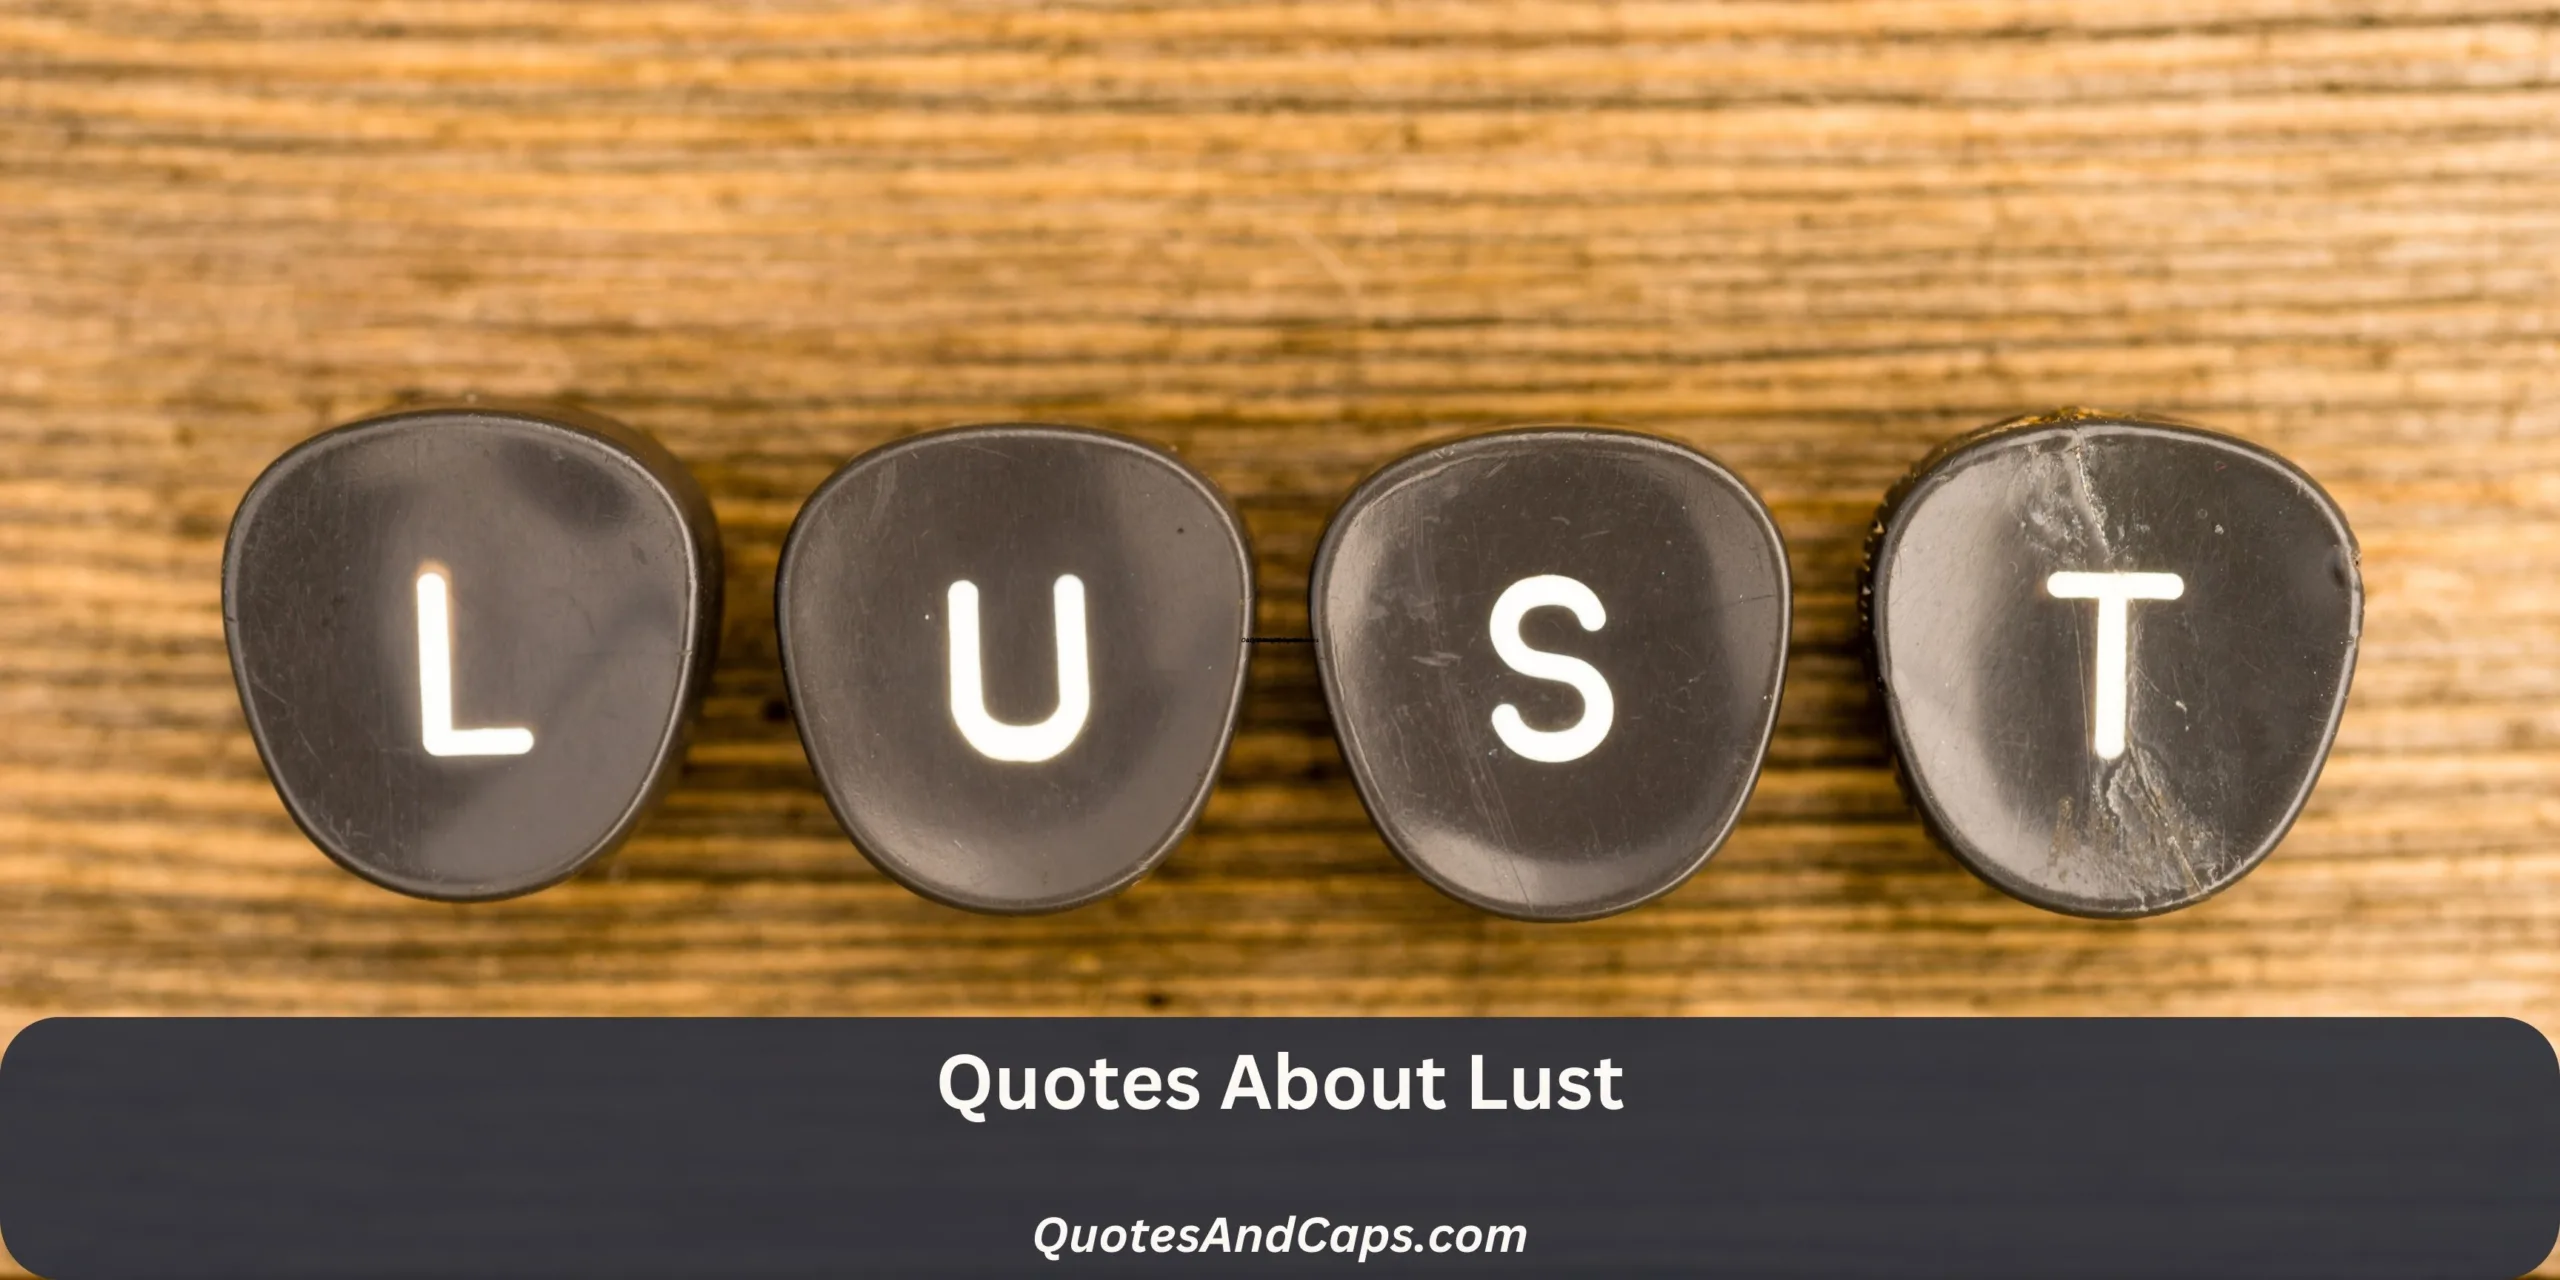 Quotes About Lust